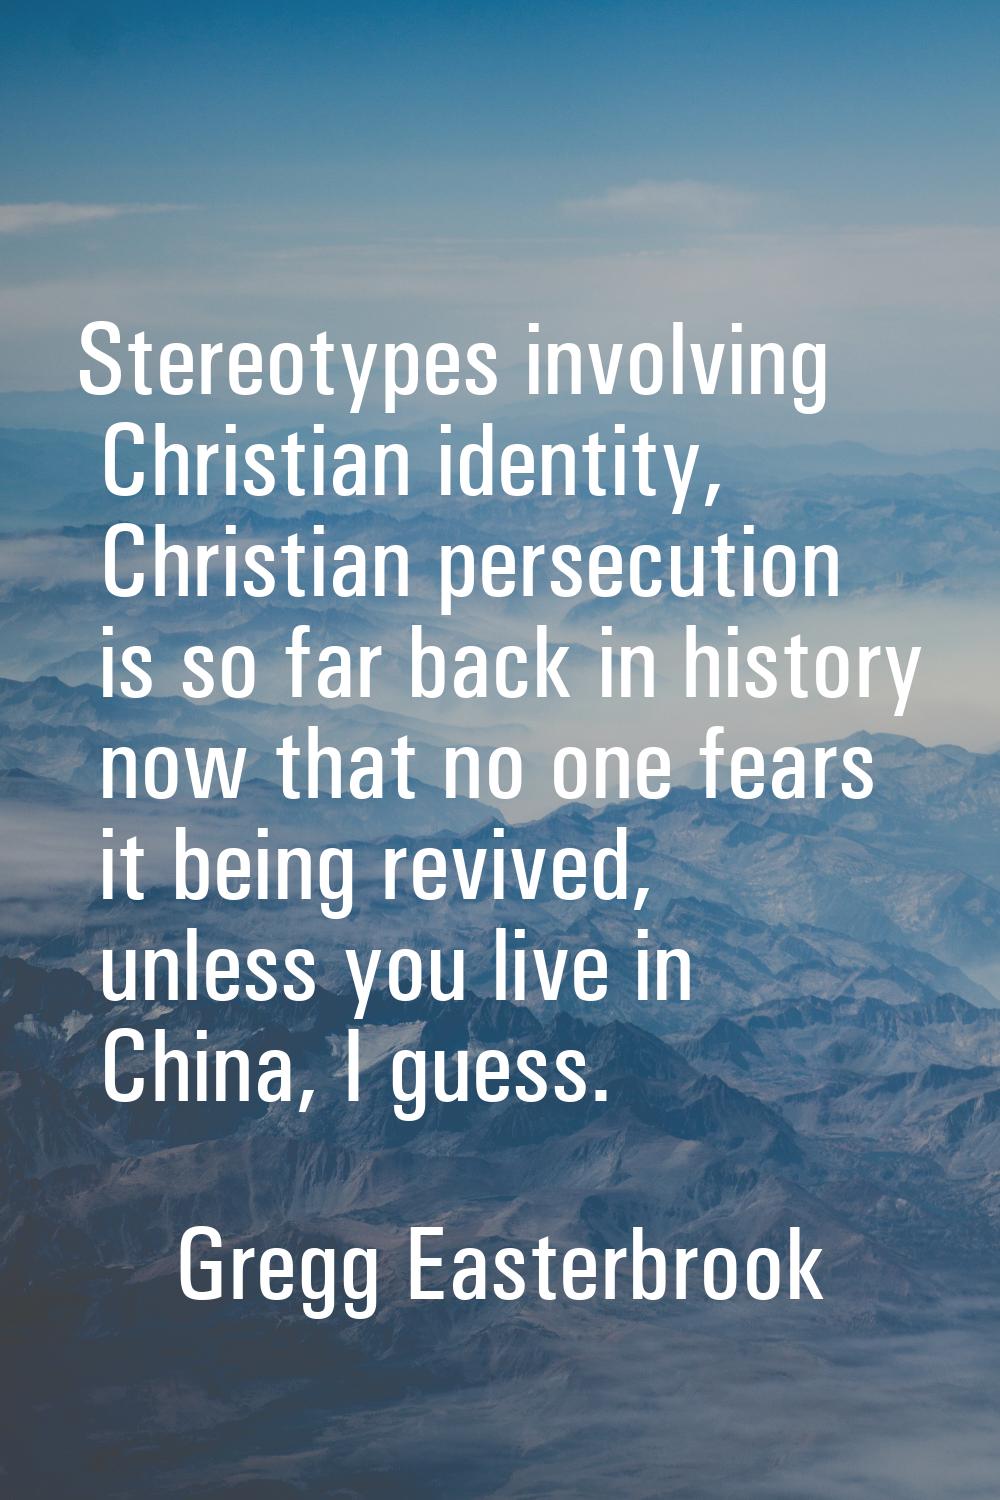 Stereotypes involving Christian identity, Christian persecution is so far back in history now that 